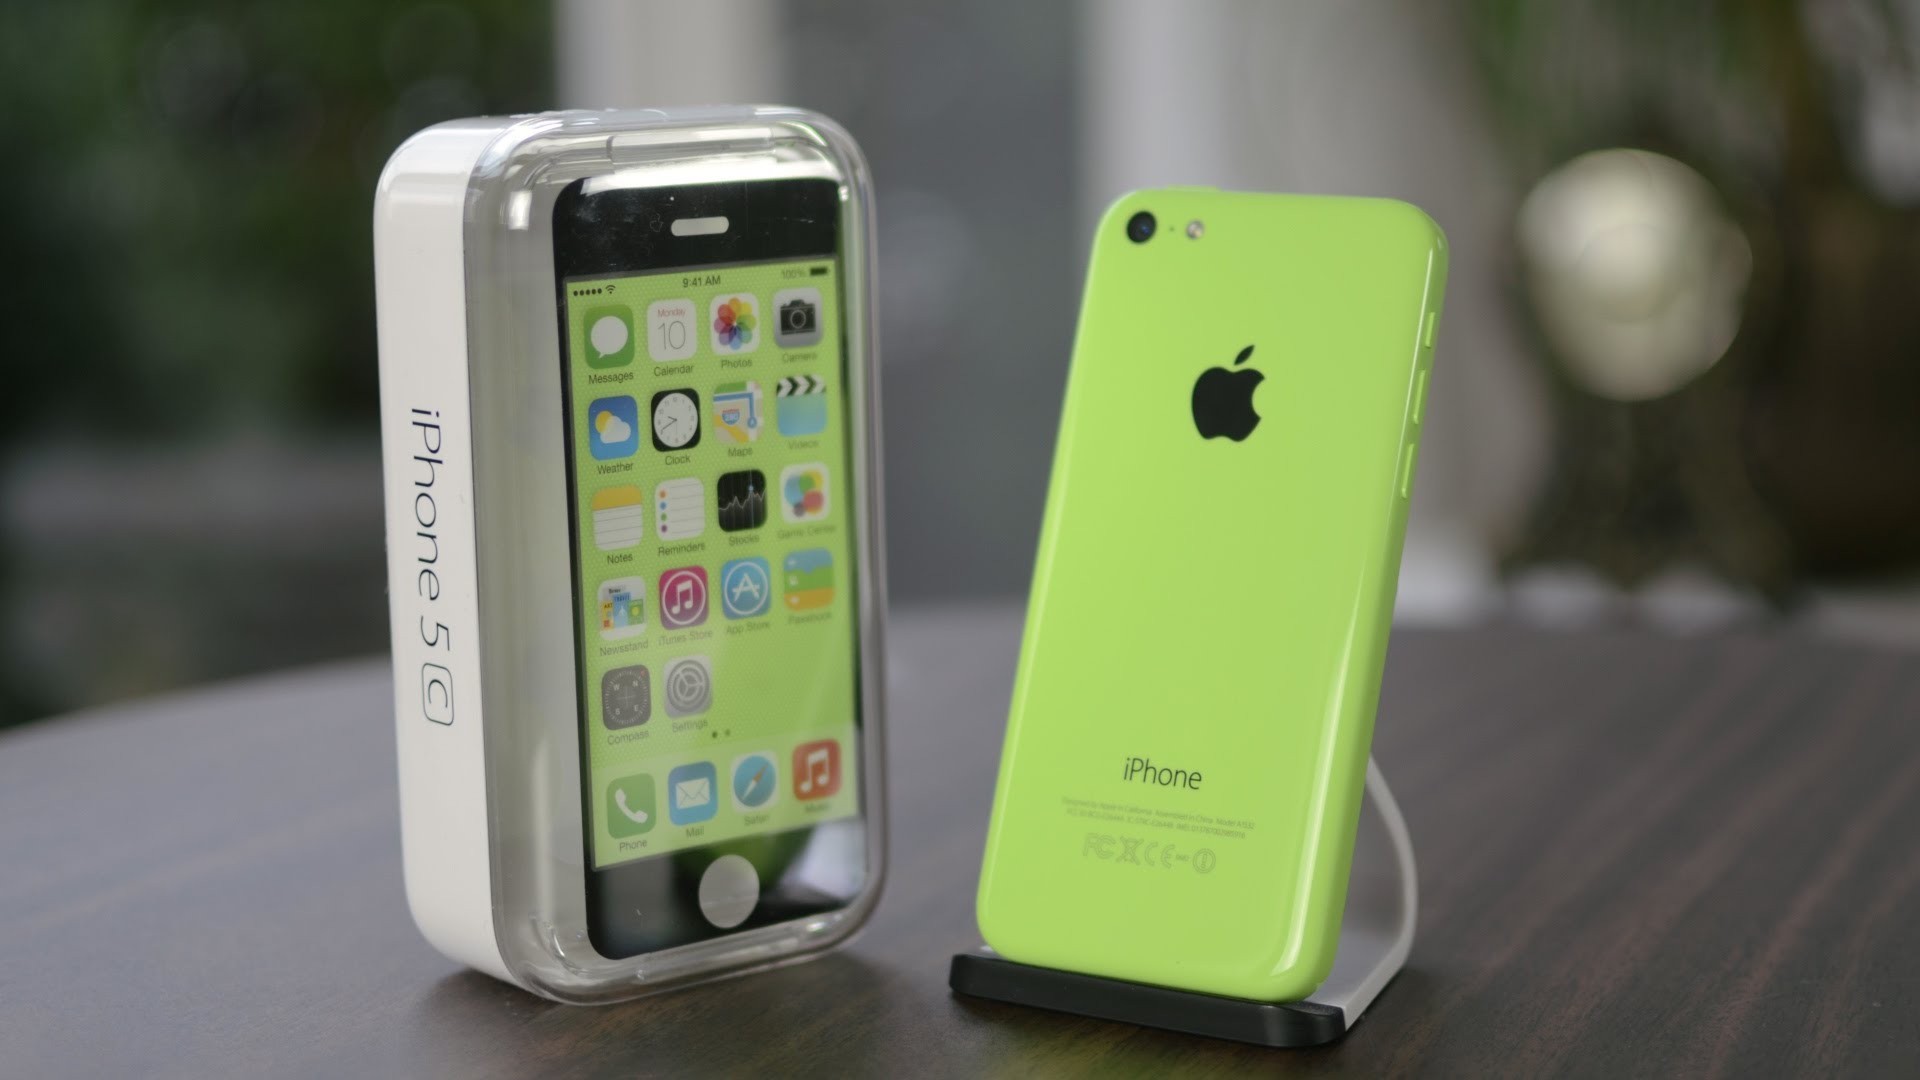 Apple iPhone 5c (Green) - Design Overview & Unboxing - YouTube